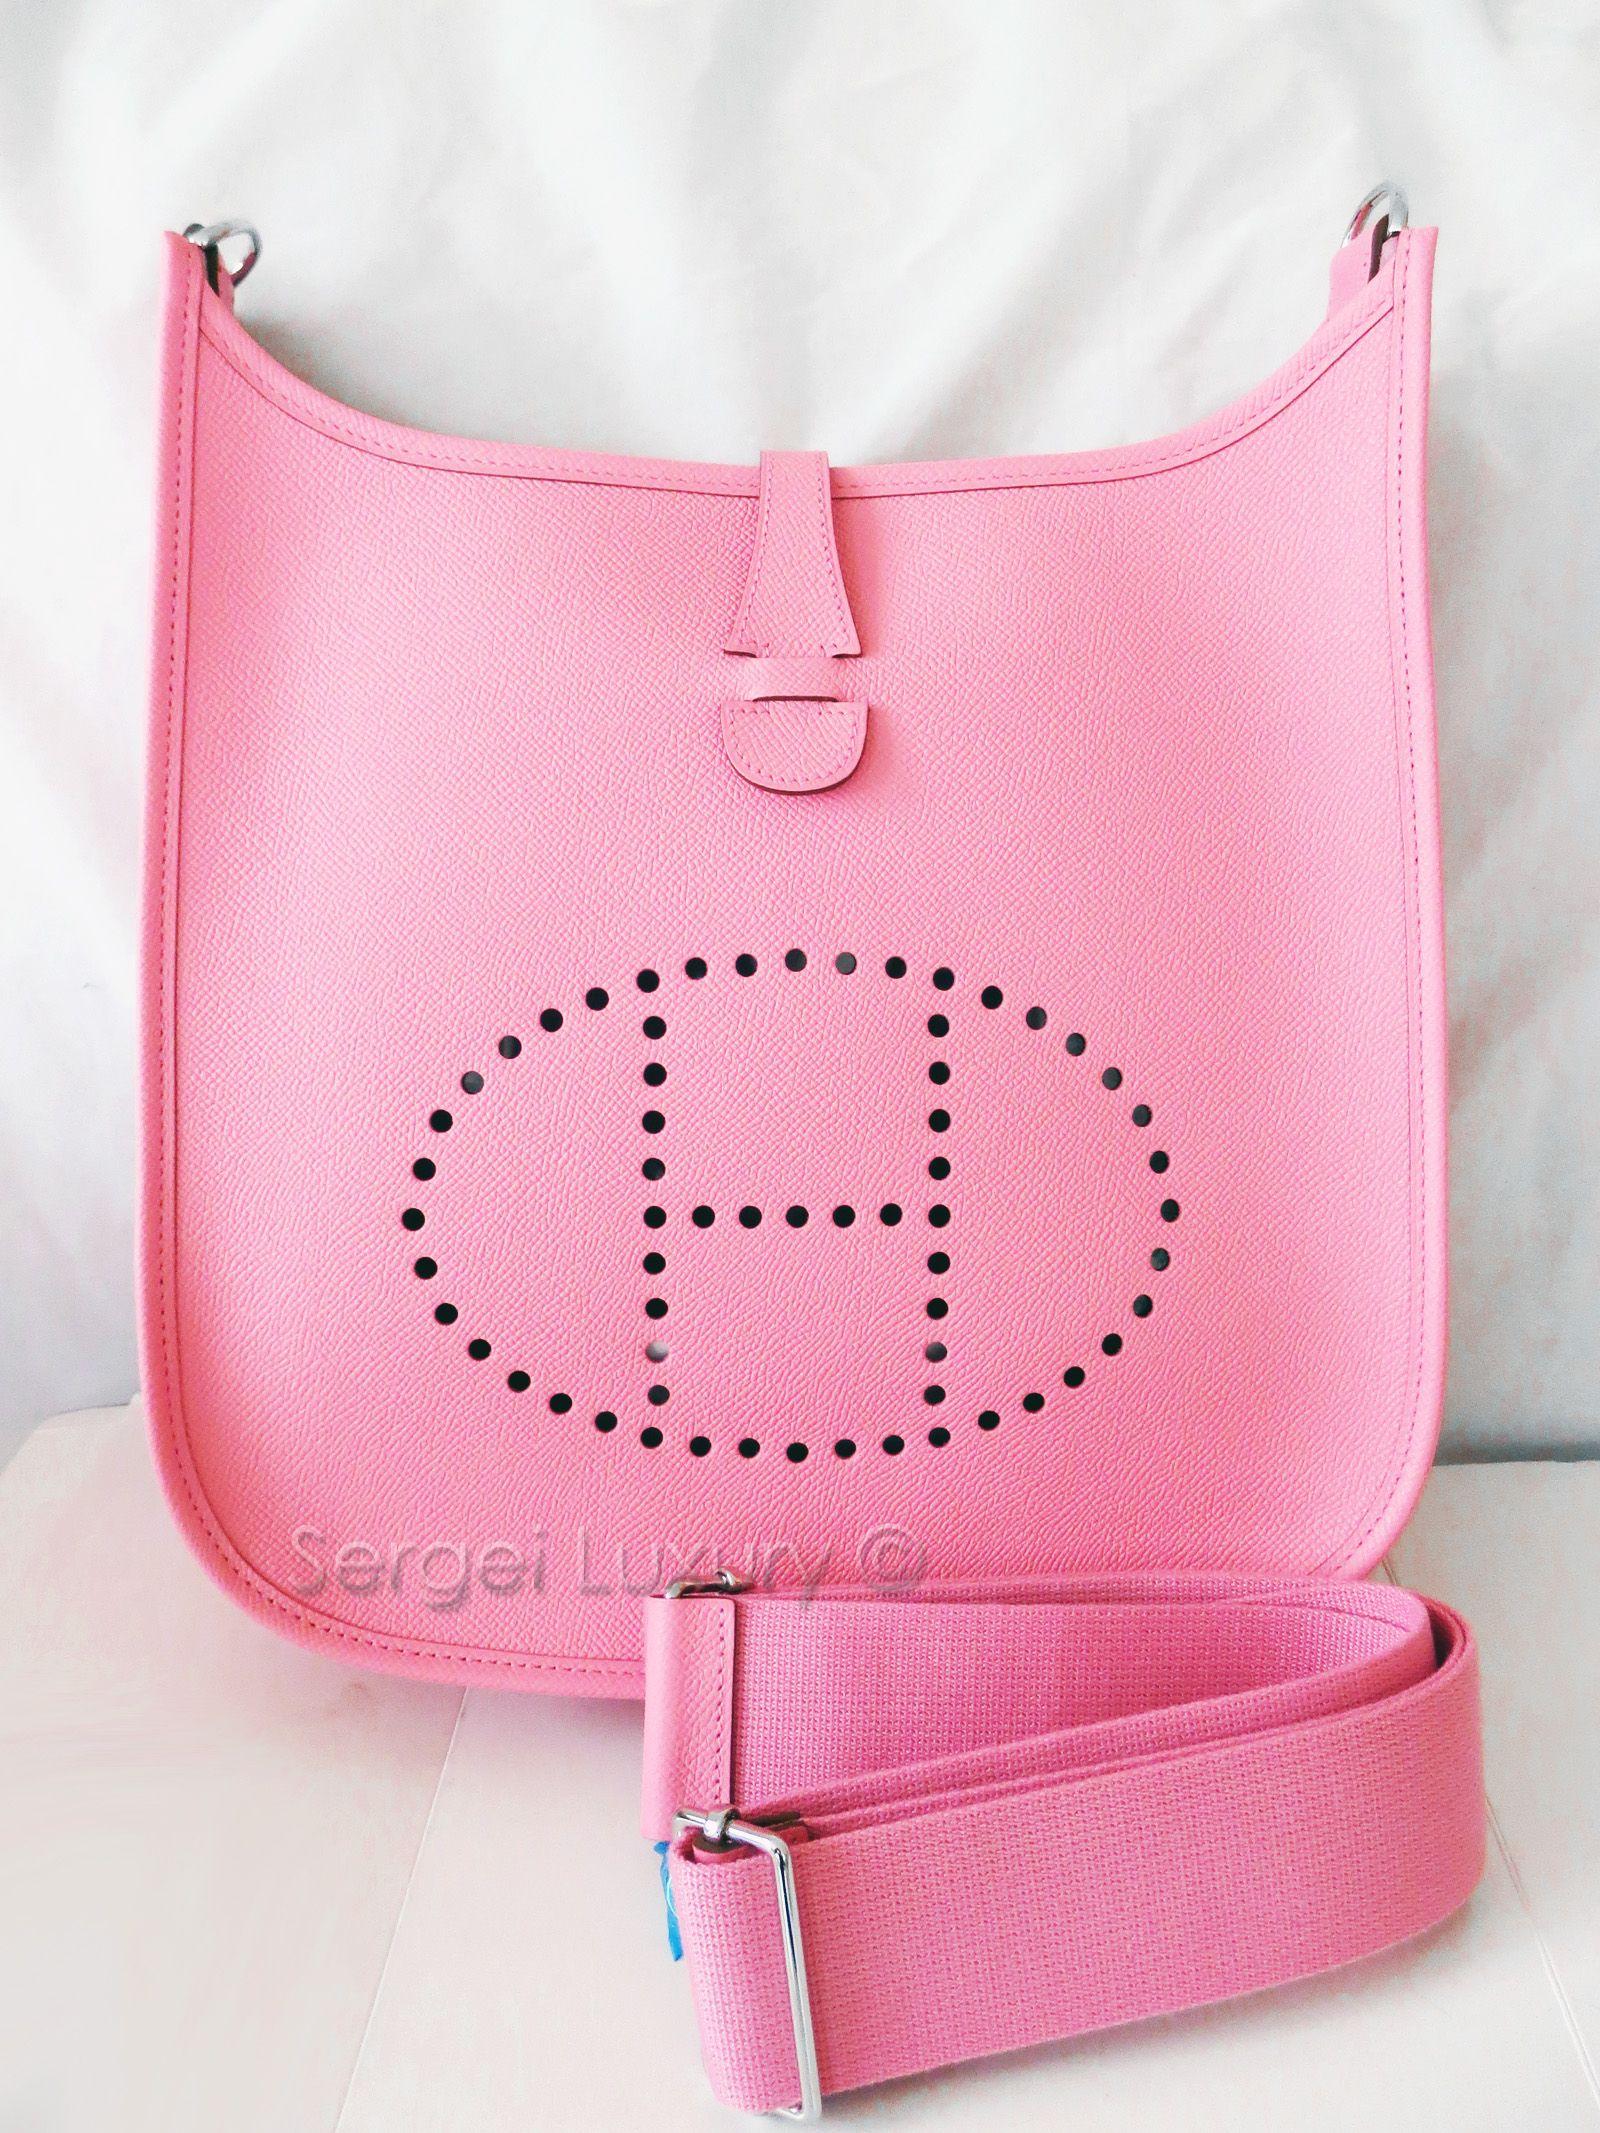 Pink Cross Logo - LOVE! New AUTHENTIC Hermes Evelyne PM Rose Confetti PINK Cross body